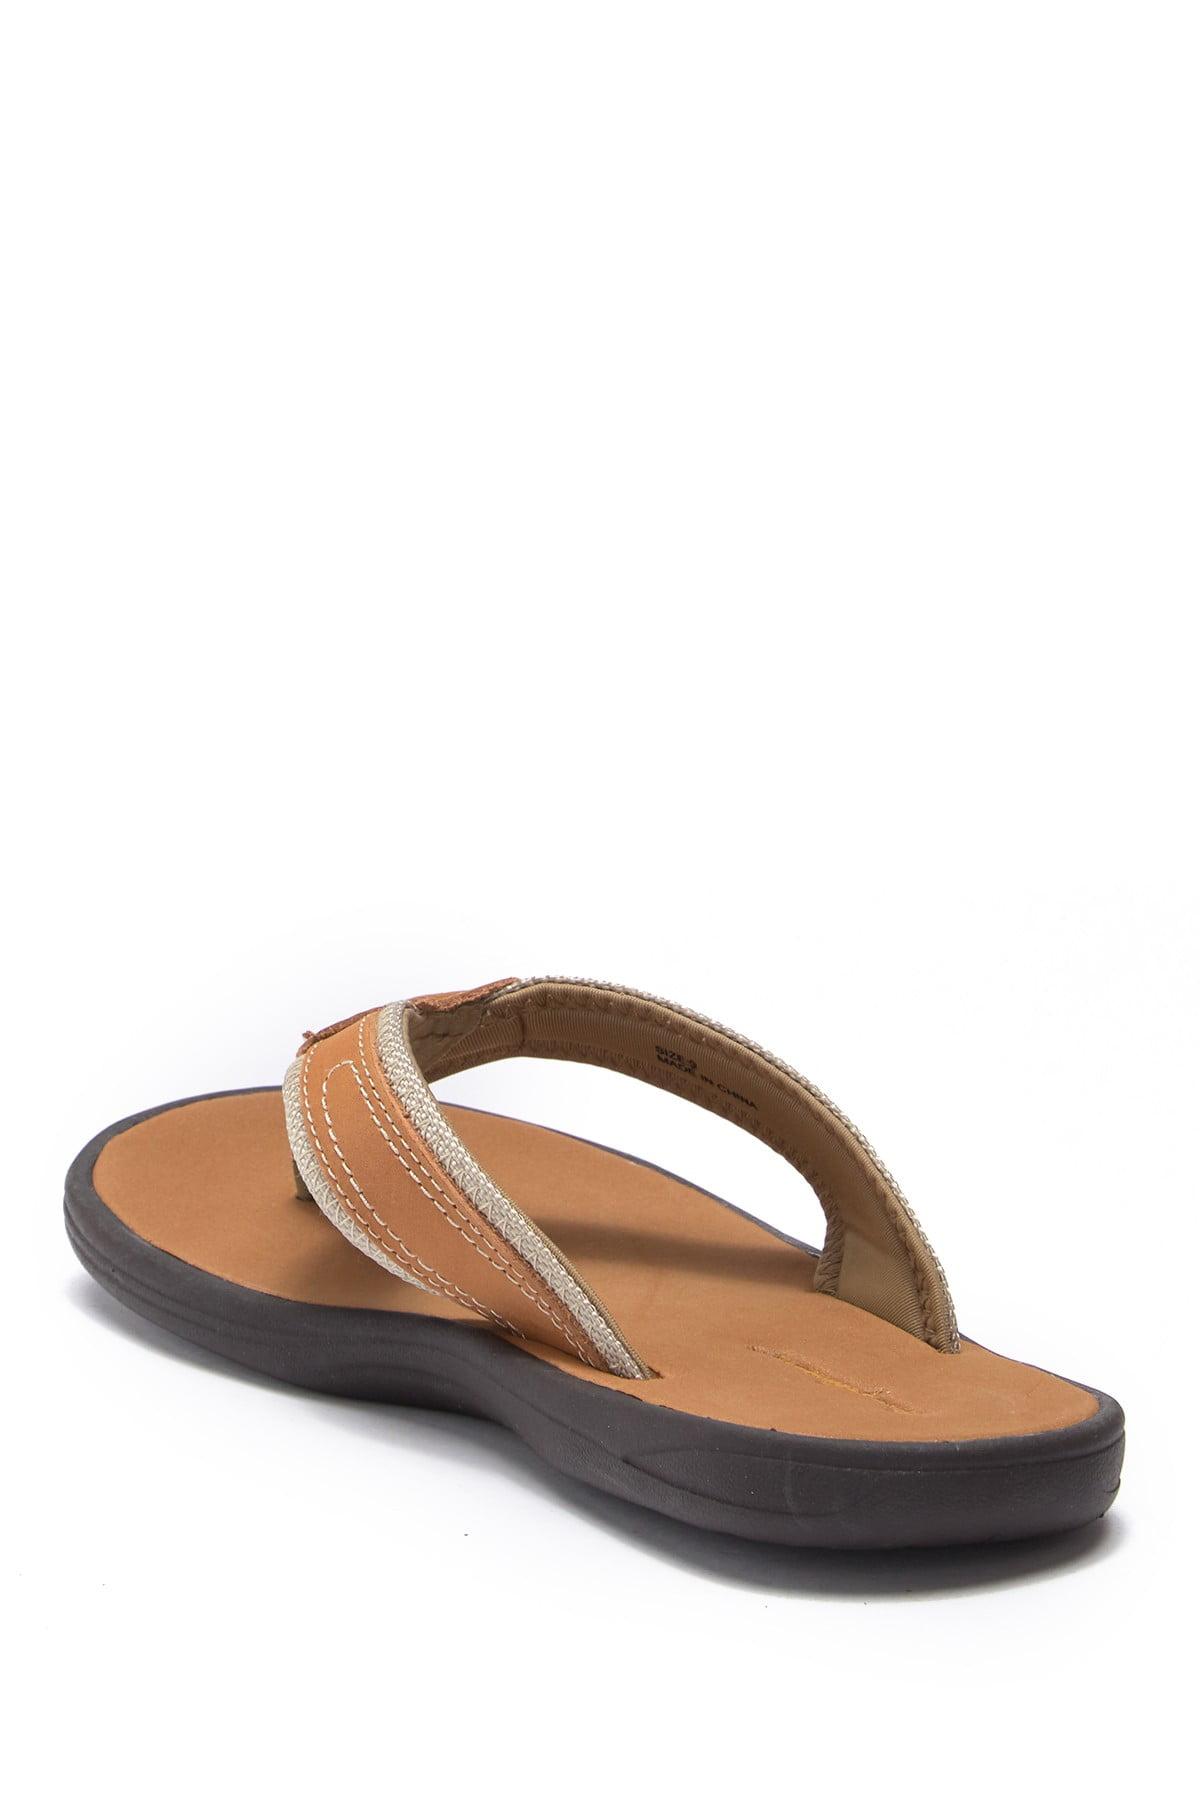 Tommy Bahama Leather Sumatraa Flip Flop in Tan (Brown) for Men - Lyst